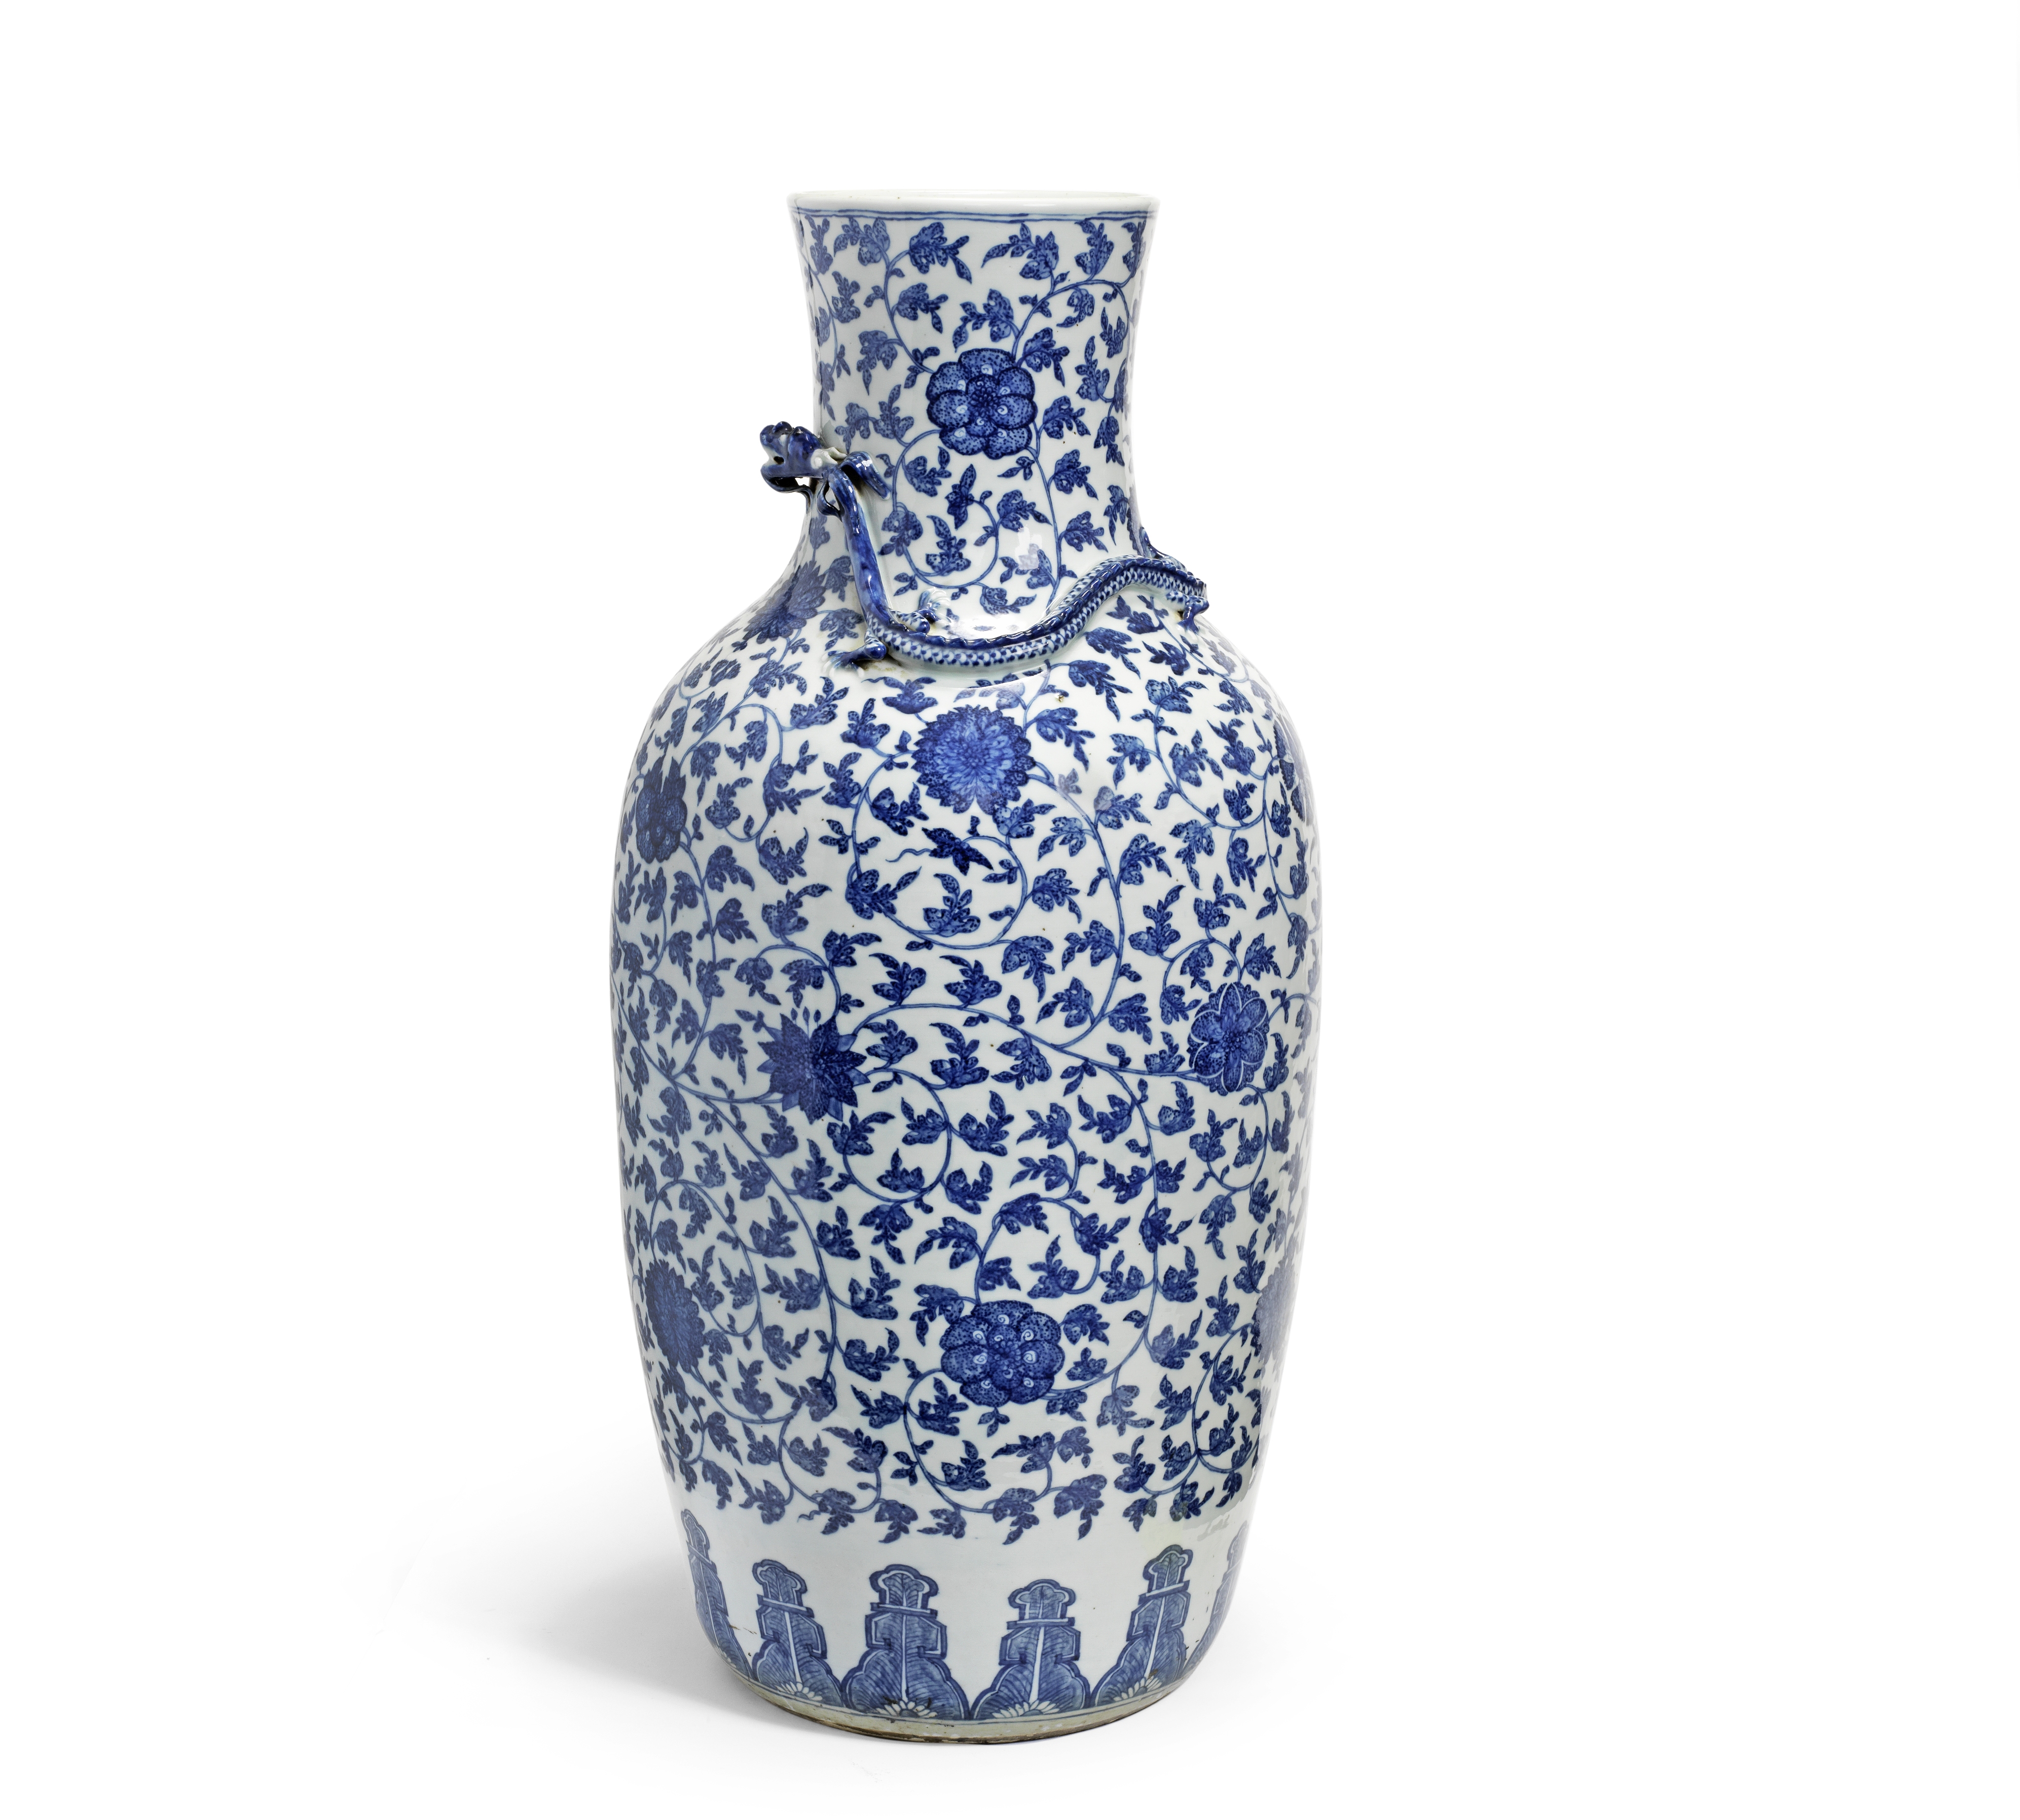 A large Ming-style blue and white baluster vase Late Qing Dynasty